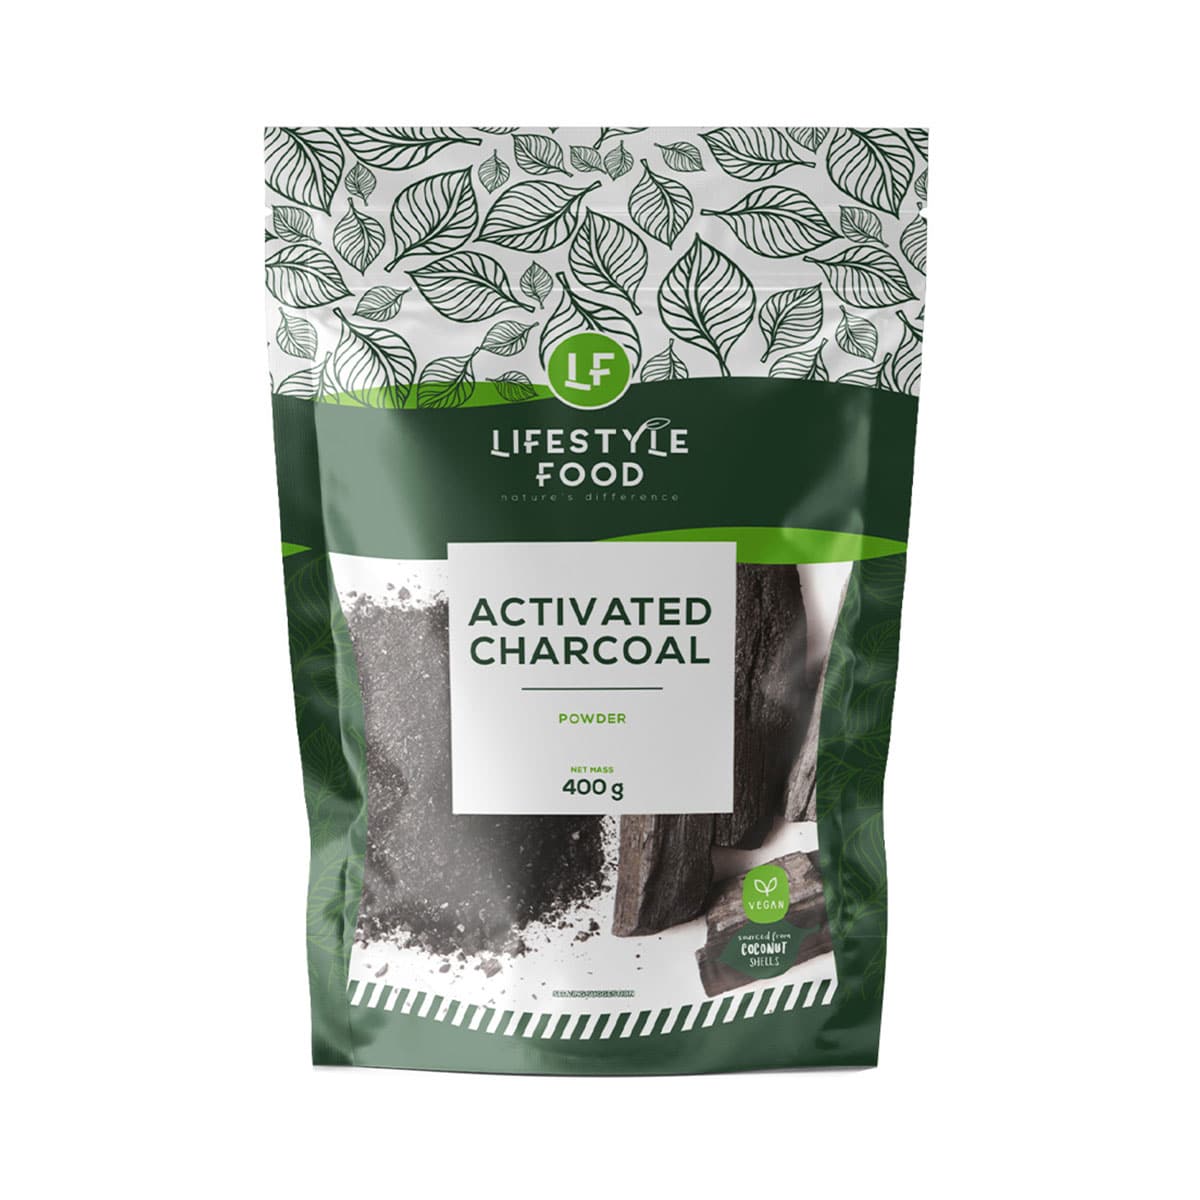 Lifestyle Food Activated Charcoal Powder - 400g